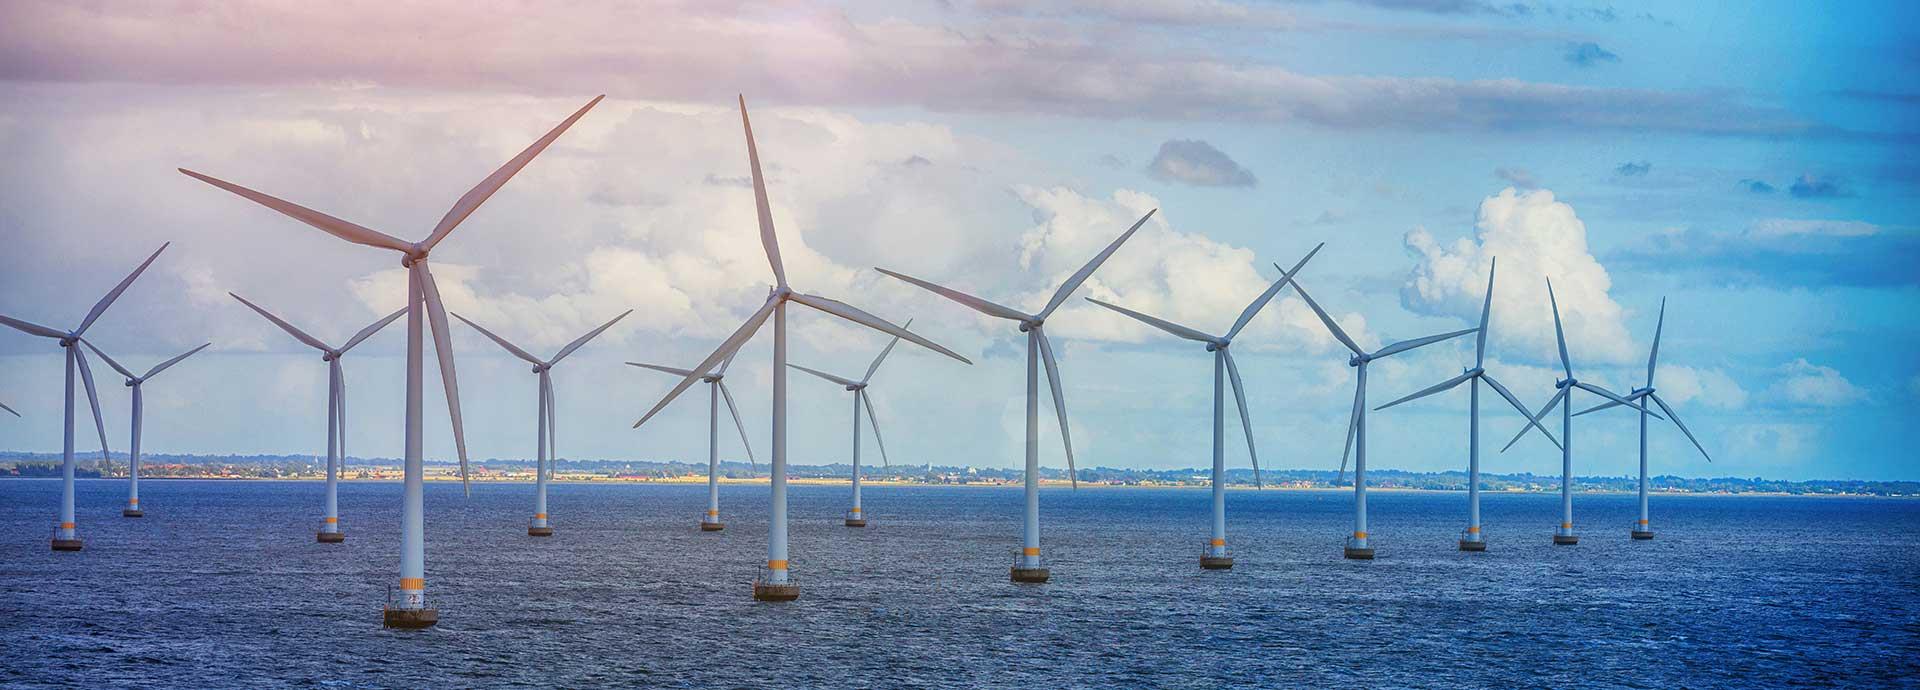 Growth of offshore wind depends on affordable, reliable support infrastructure